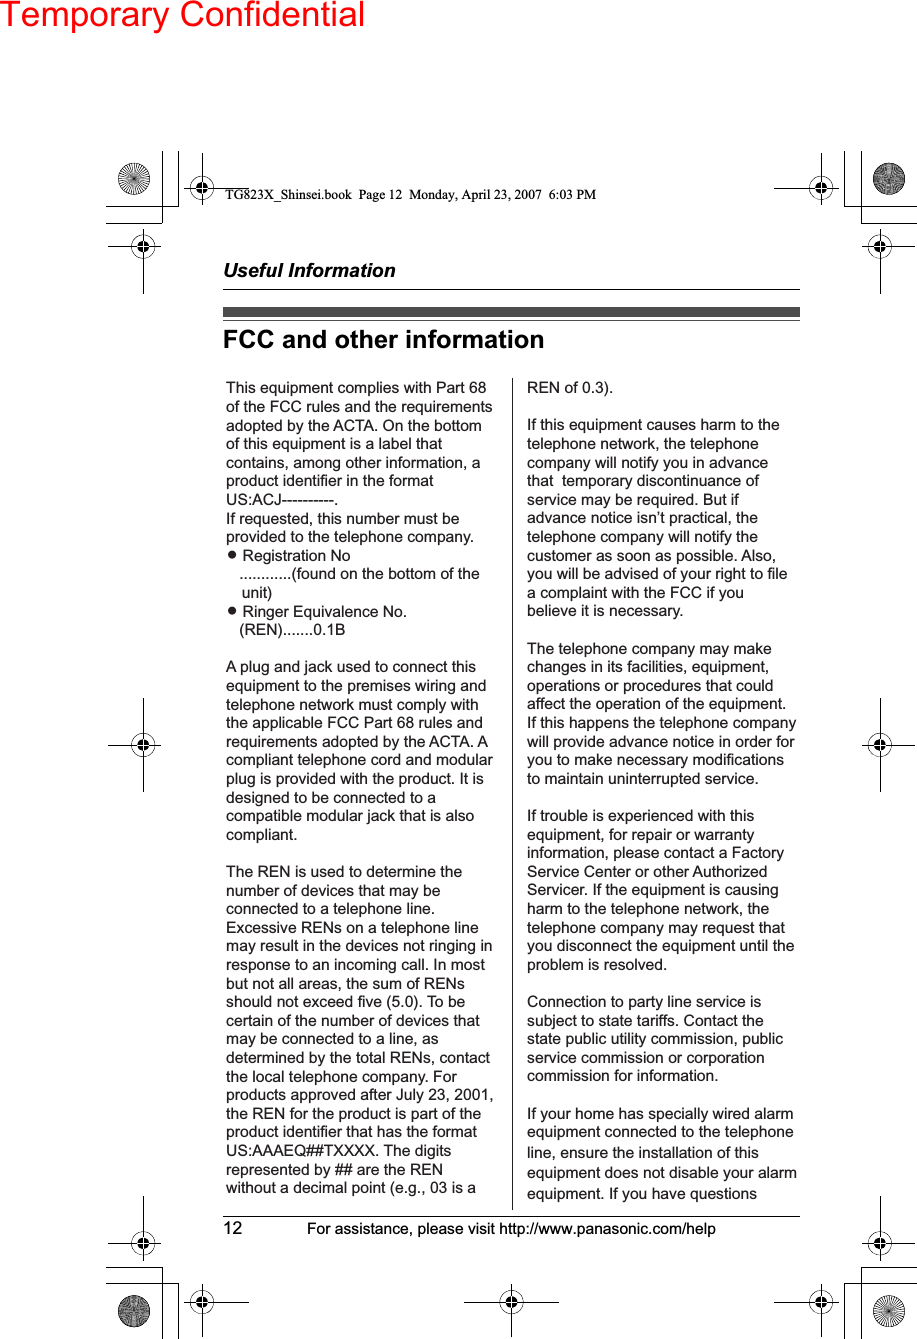 Useful Information12 For assistance, please visit http://www.panasonic.com/helpFCC and other informationThis equipment complies with Part 68 of the FCC rules and the requirements adopted by the ACTA. On the bottom of this equipment is a label that contains, among other information, a product identifier in the format US:ACJ----------.If requested, this number must be provided to the telephone company.L Registration No   ............(found on the bottom of the unit)L Ringer Equivalence No.   (REN).......0.1BA plug and jack used to connect this equipment to the premises wiring and telephone network must comply with the applicable FCC Part 68 rules and requirements adopted by the ACTA. A compliant telephone cord and modular plug is provided with the product. It is designed to be connected to a compatible modular jack that is also compliant.The REN is used to determine the number of devices that may be connected to a telephone line. Excessive RENs on a telephone line may result in the devices not ringing in response to an incoming call. In most but not all areas, the sum of RENs should not exceed five (5.0). To be certain of the number of devices that may be connected to a line, as determined by the total RENs, contact the local telephone company. For products approved after July 23, 2001, the REN for the product is part of the product identifier that has the format US:AAAEQ##TXXXX. The digits represented by ## are the REN without a decimal point (e.g., 03 is a REN of 0.3).If this equipment causes harm to the telephone network, the telephone company will notify you in advance that  temporary discontinuance of service may be required. But if advance notice isn’t practical, the telephone company will notify the customer as soon as possible. Also, you will be advised of your right to file a complaint with the FCC if you believe it is necessary.The telephone company may make changes in its facilities, equipment, operations or procedures that could affect the operation of the equipment. If this happens the telephone company will provide advance notice in order for you to make necessary modifications to maintain uninterrupted service.If trouble is experienced with this equipment, for repair or warranty information, please contact a Factory Service Center or other Authorized Servicer. If the equipment is causing harm to the telephone network, the telephone company may request that you disconnect the equipment until the problem is resolved.Connection to party line service is subject to state tariffs. Contact the state public utility commission, public service commission or corporation commission for information.If your home has specially wired alarm equipment connected to the telephone line, ensure the installation of this equipment does not disable your alarm equipment. If you have questions TG823X_Shinsei.book  Page 12  Monday, April 23, 2007  6:03 PMTemporary Confidential